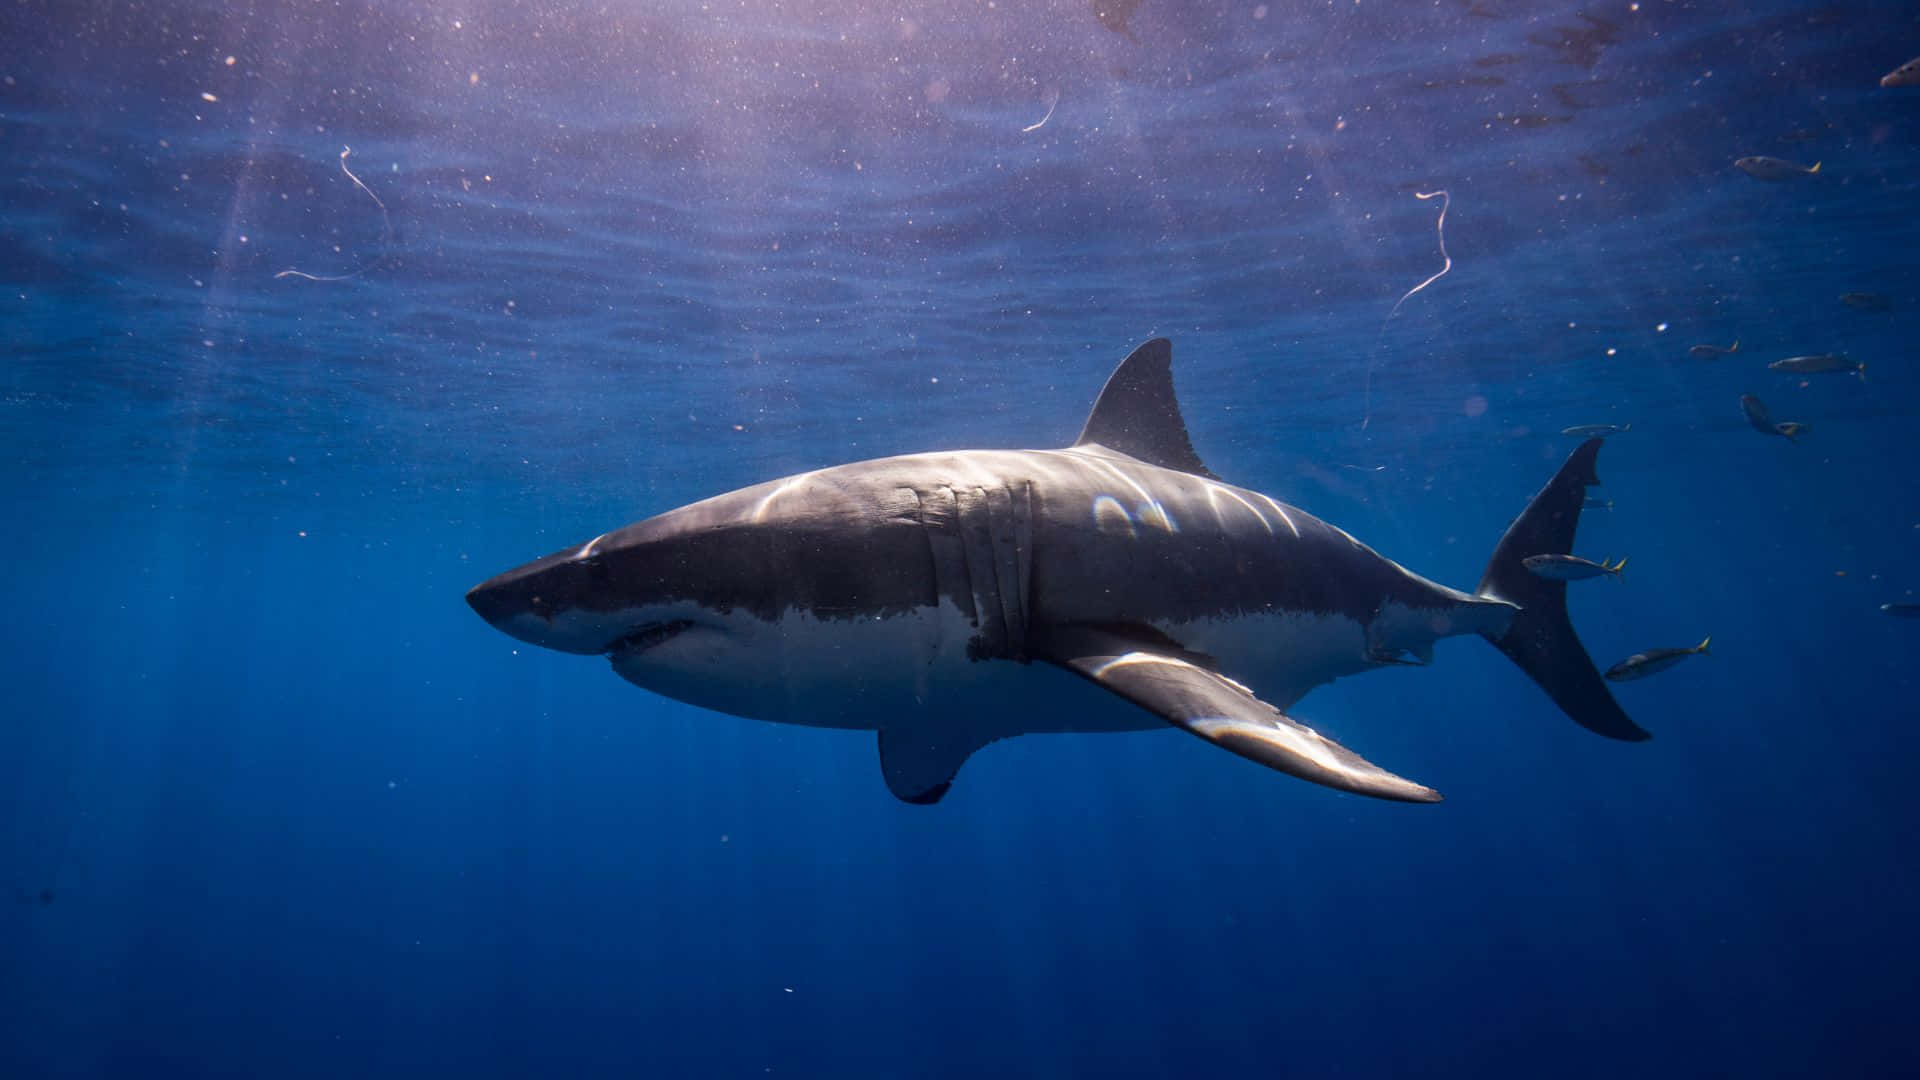 Scary Ocean Shark With Sunlight Picture 1920 x 1080 Picture